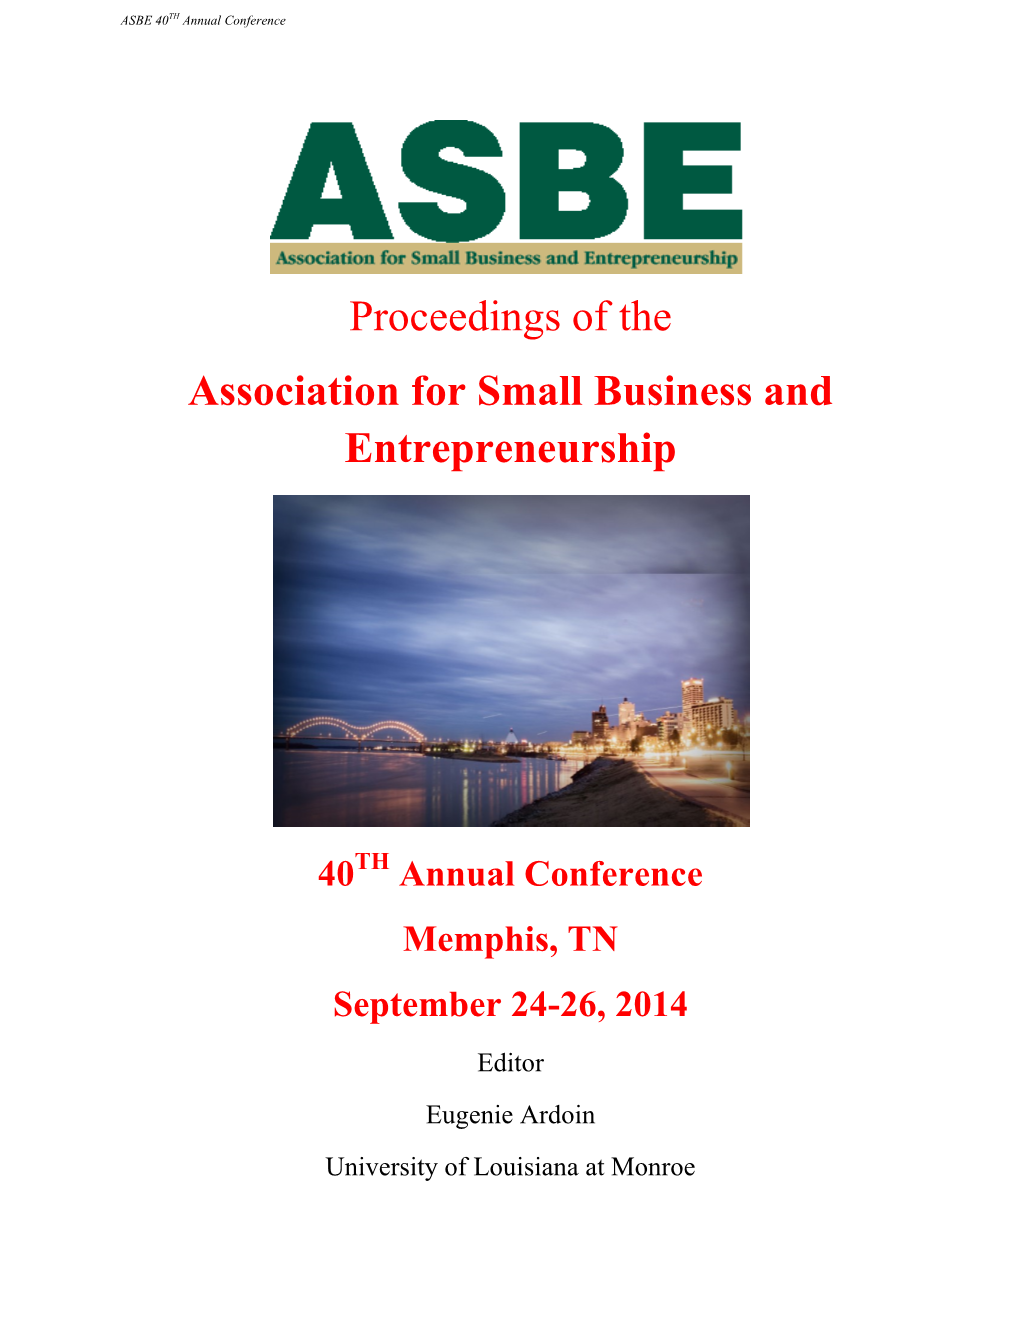 Proceedings of the Association for Small Business and Entrepreneurship